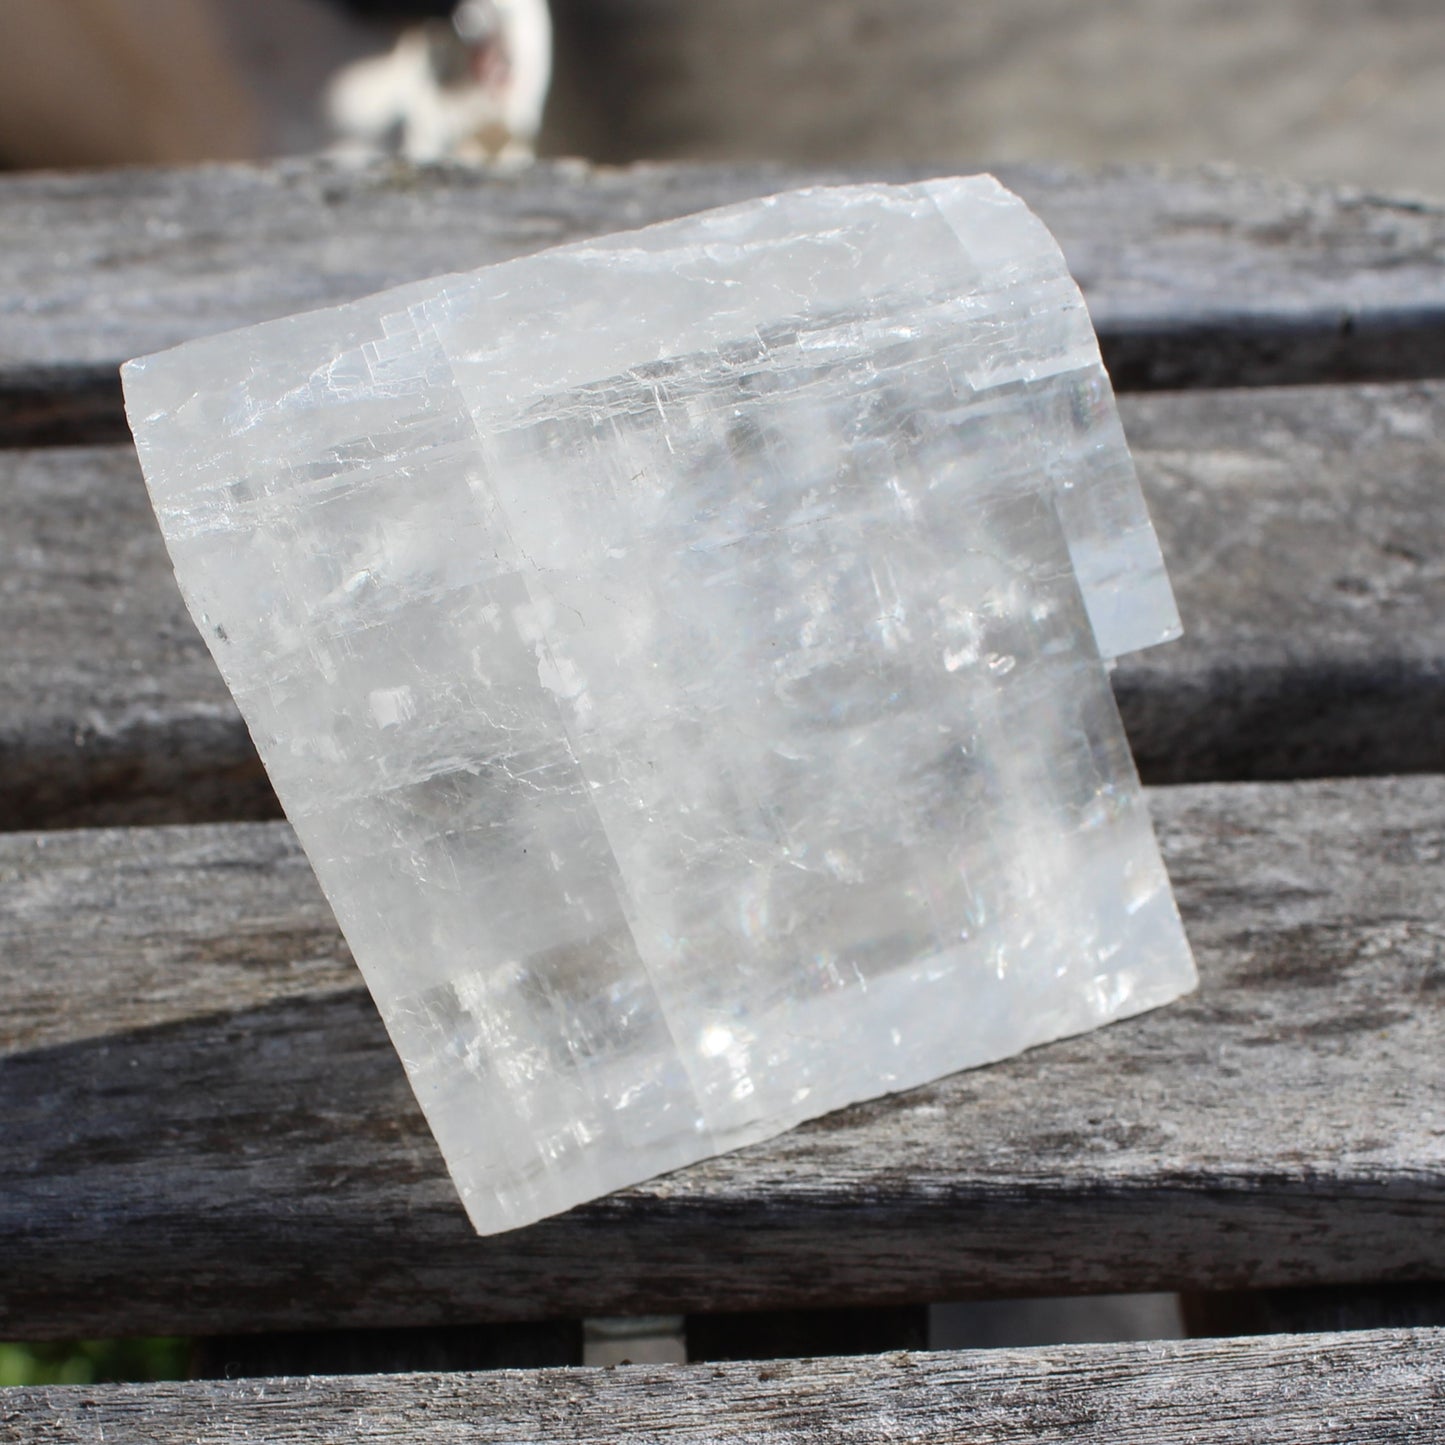 Optical Calcite Spar crystal from China 206g